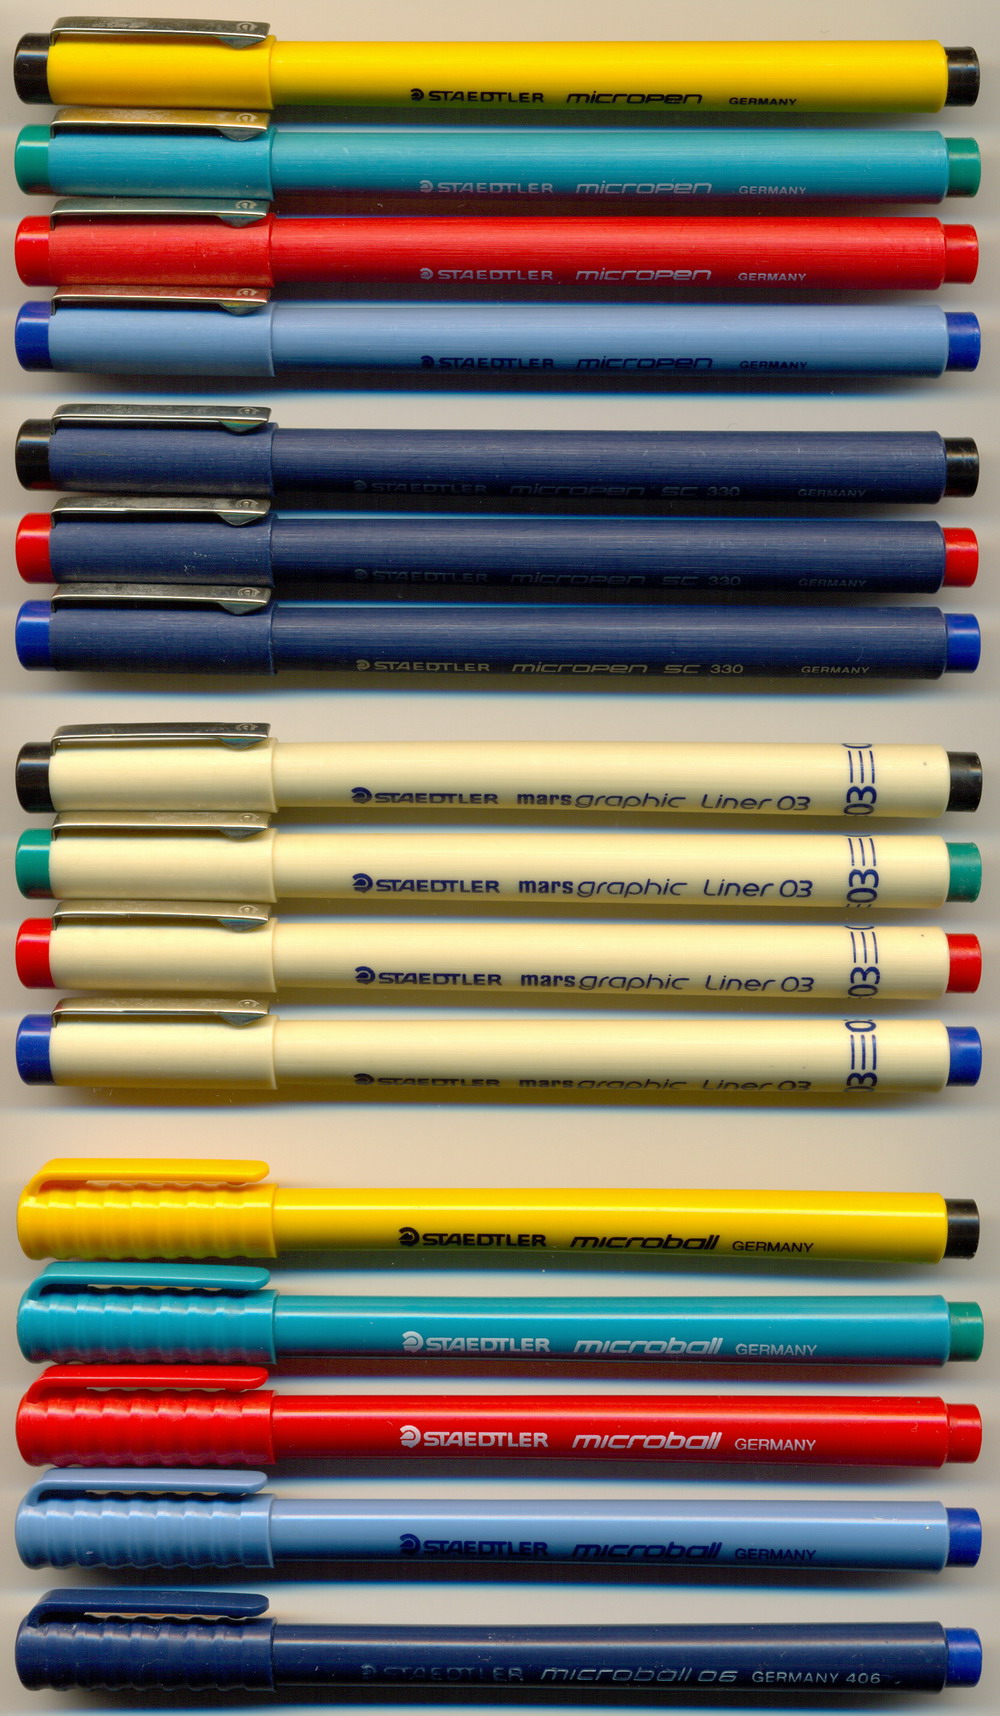 STAEDTLER micropen - mars graphic Liner 03 307 - micropen - SC 330 - microball - microball 06 406